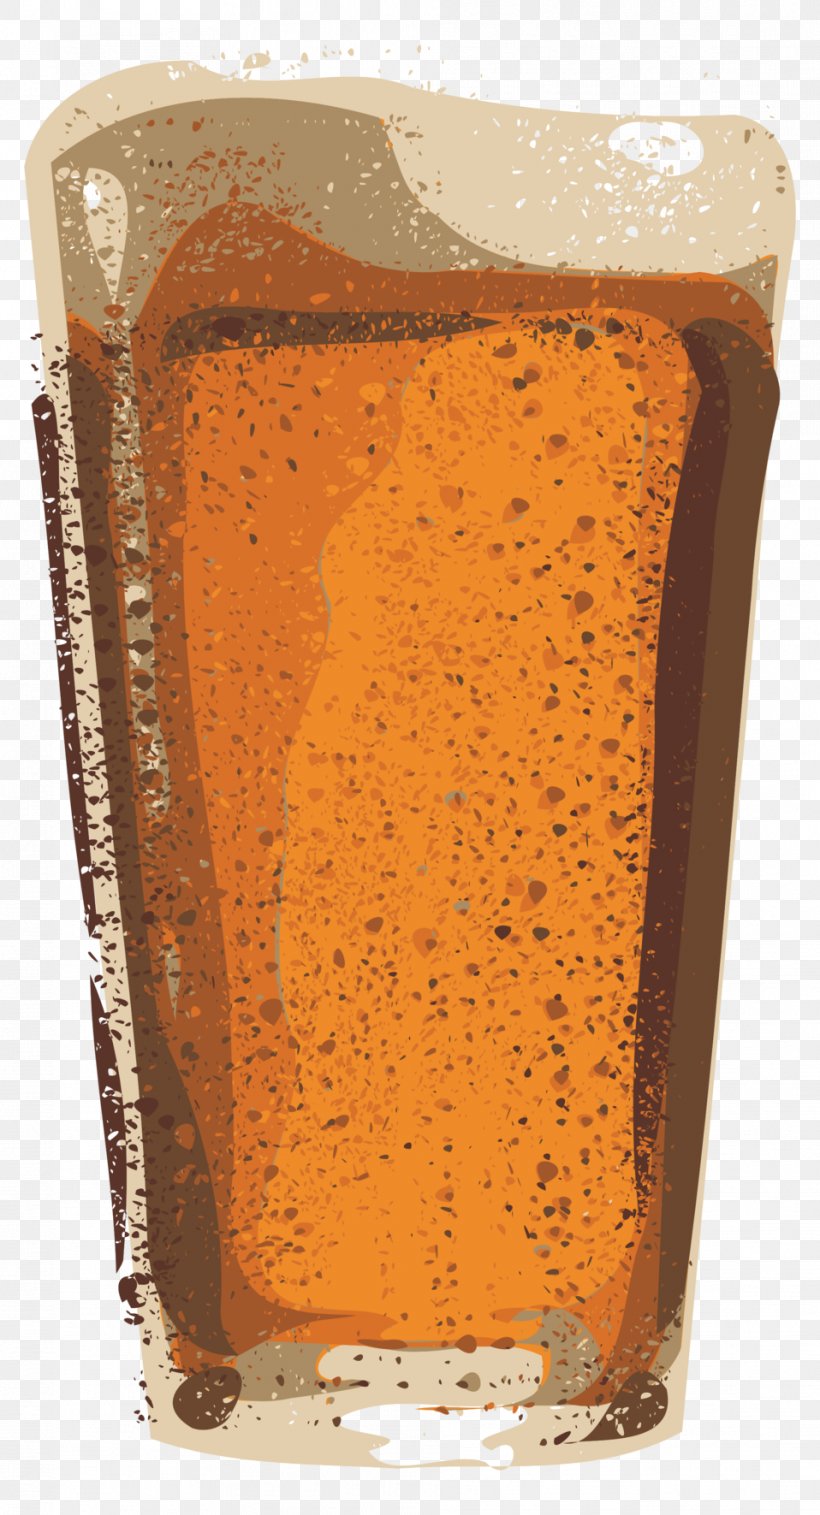 Beer Glasses Pint Glass Clip Art, PNG, 958x1771px, Beer, Beer Glass, Beer Glasses, Beverage Can, Caramel Color Download Free